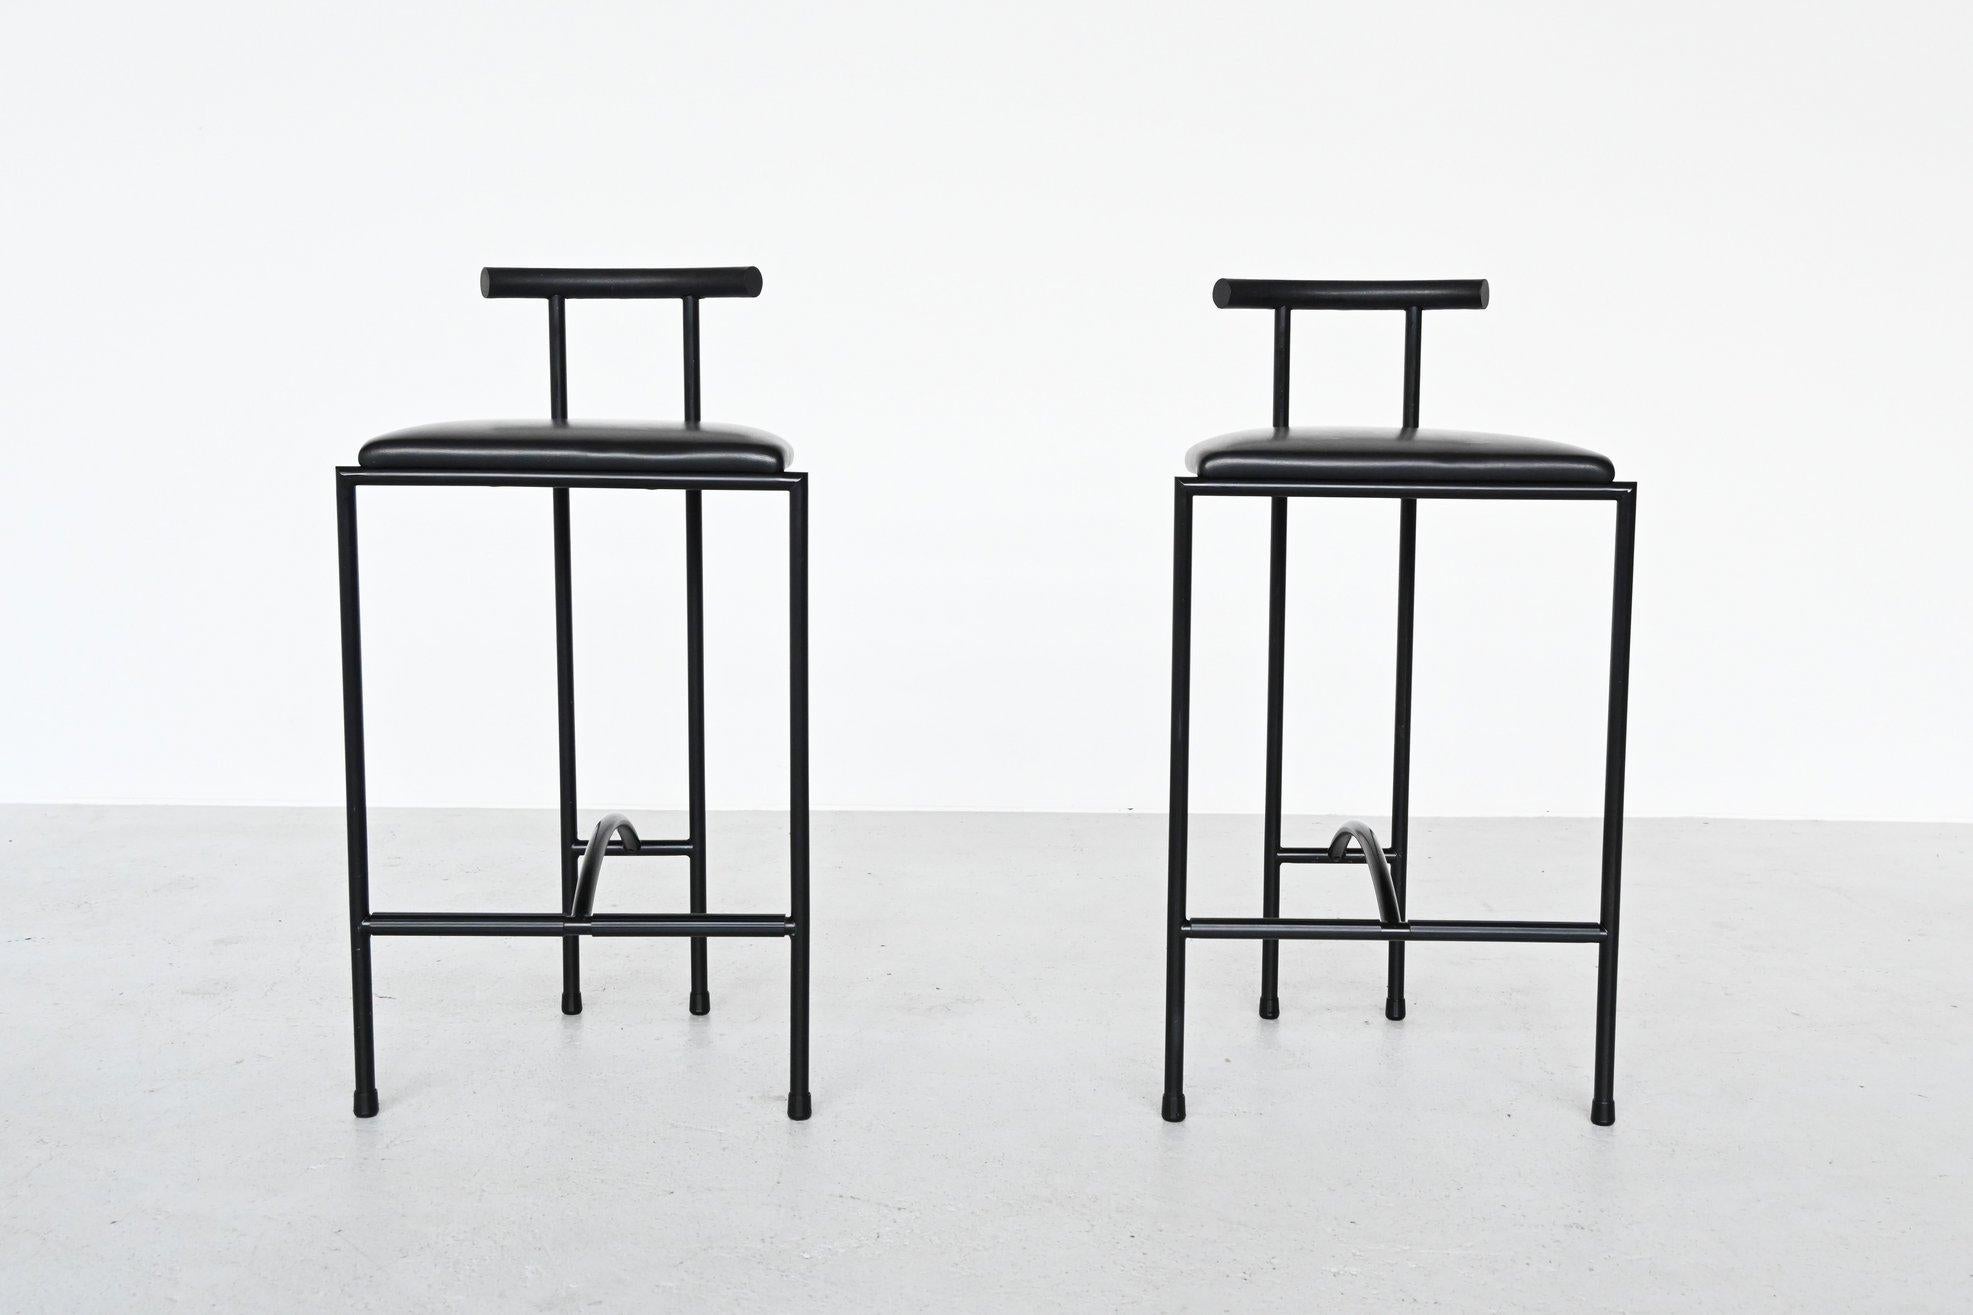 Beautiful pair of Tokyo bar stools designed by Rodney Kinsman for Bieffeplast, Italy, 1985. They have Japanese inspired forms. The stools have a black painted tubular metal frame, a black rubber back rest and black faux leather upholstered seat.